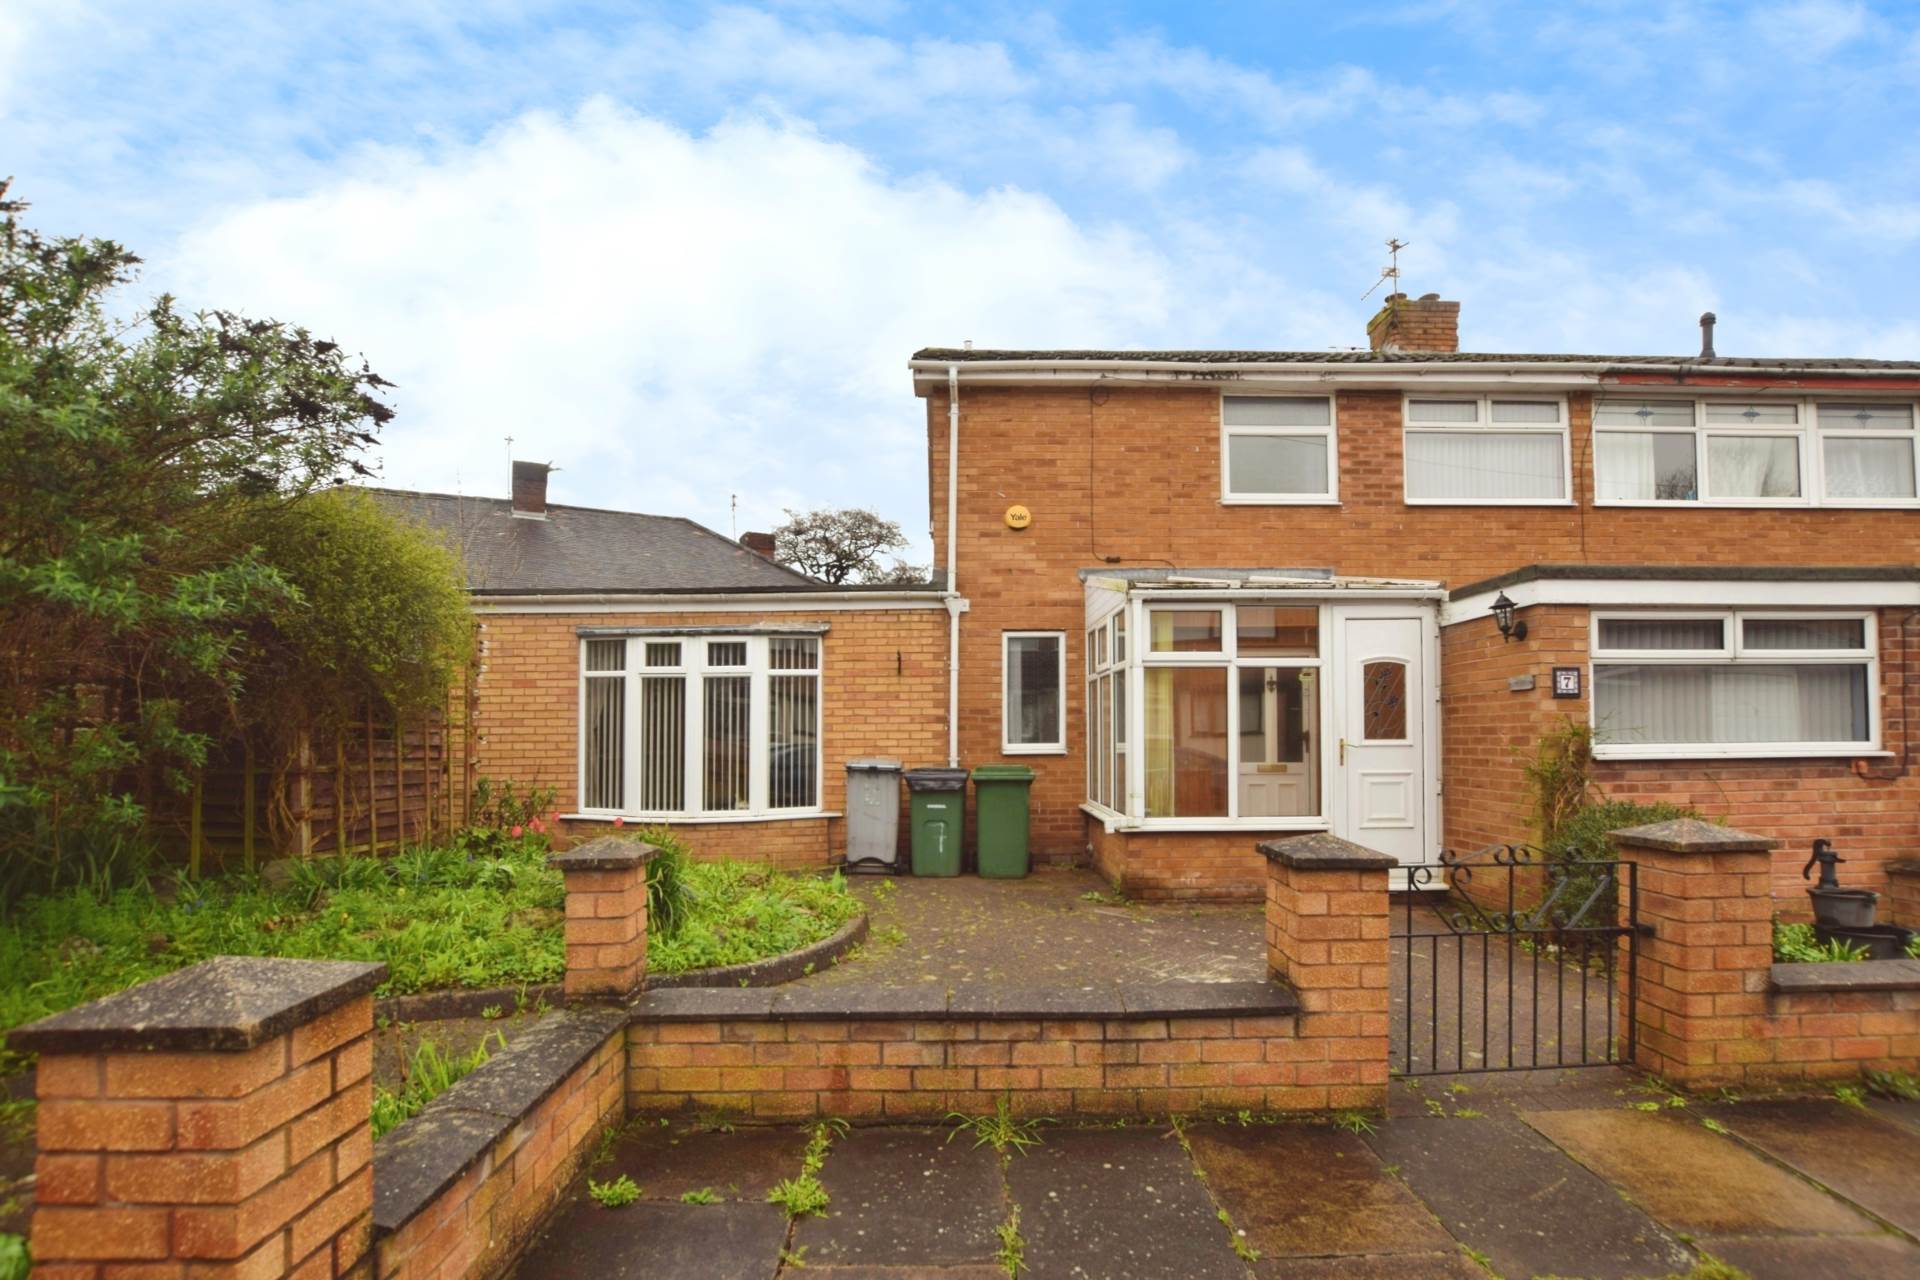 Knowsley Close, Rock Ferry, Image 1